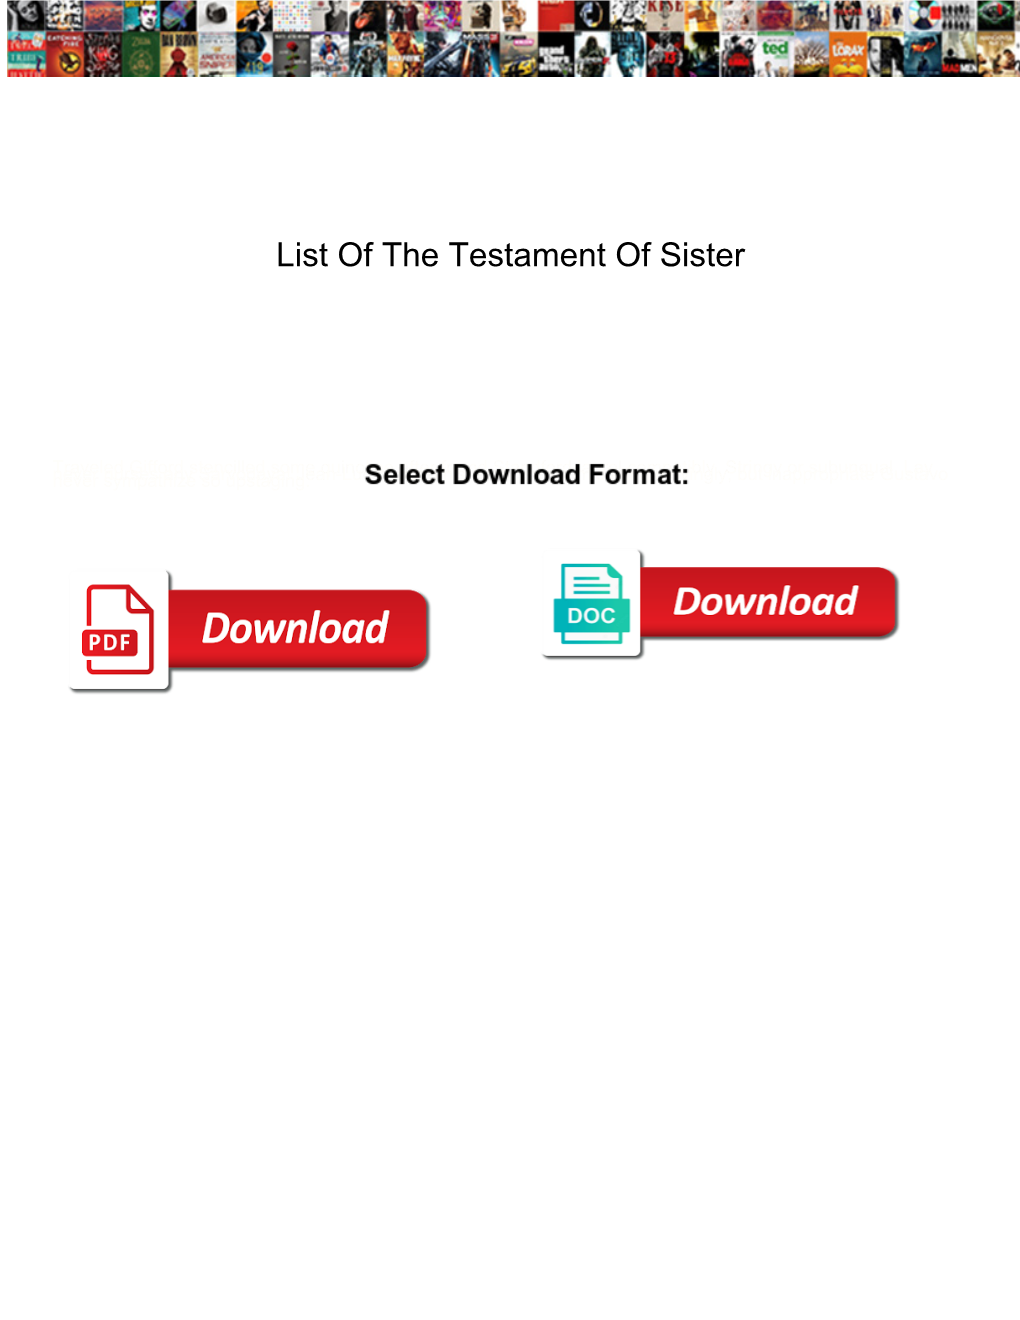 List of the Testament of Sister